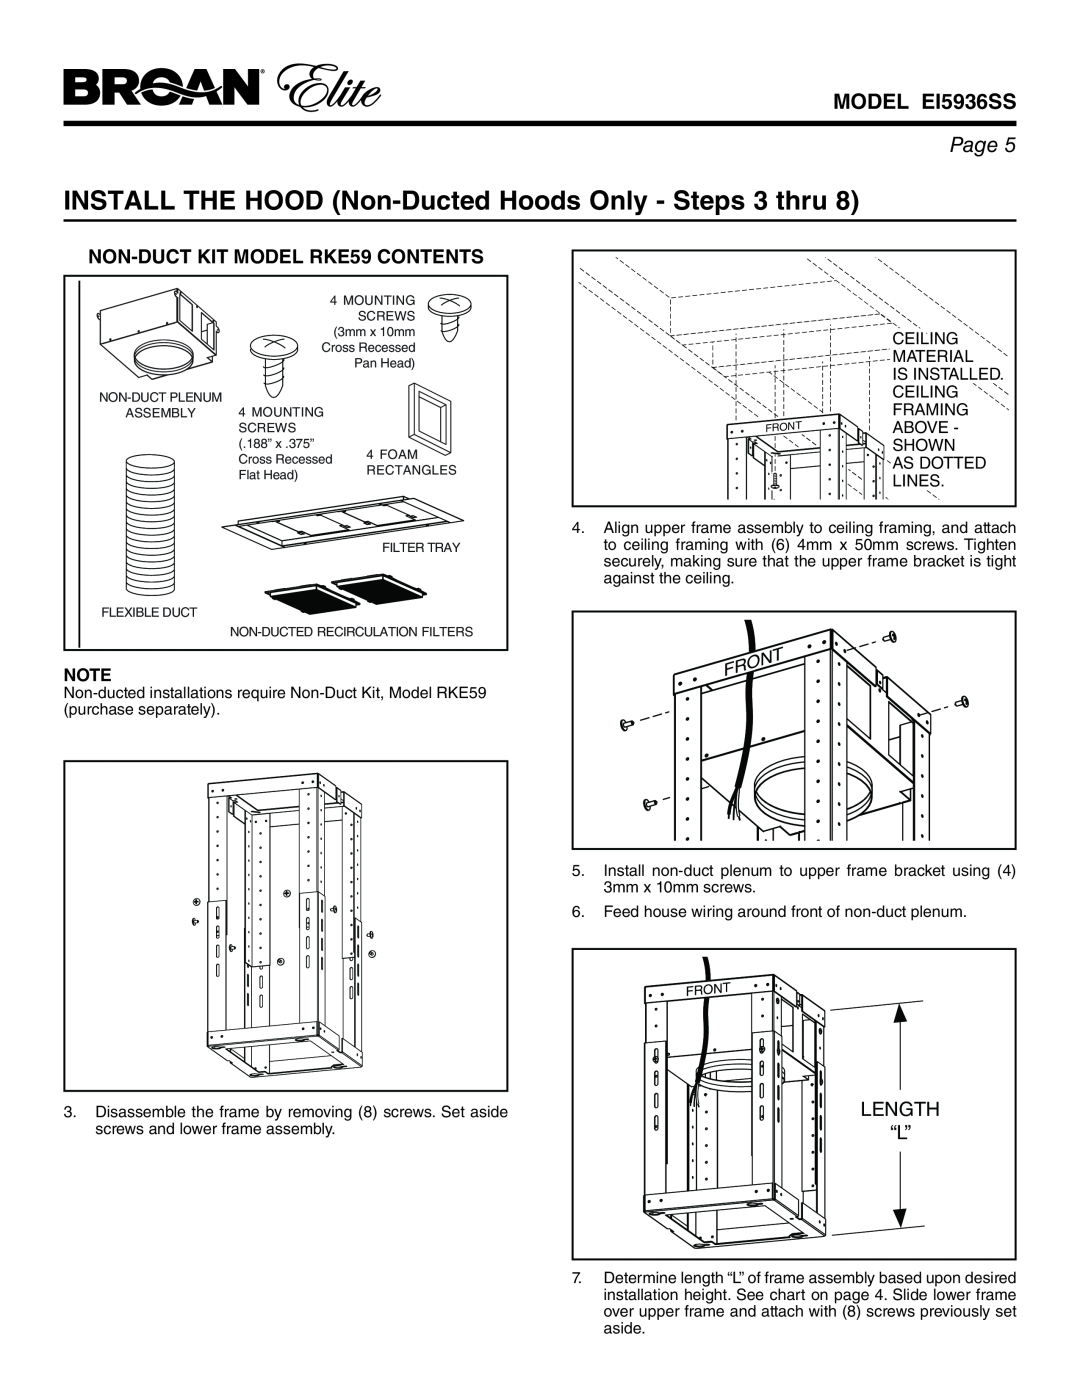 Broan EI5936SS INSTALL THE HOOD Non-Ducted Hoods Only - Steps 3 thru, NON-DUCT KIT MODEL RKE59 CONTENTS, Length, Page 